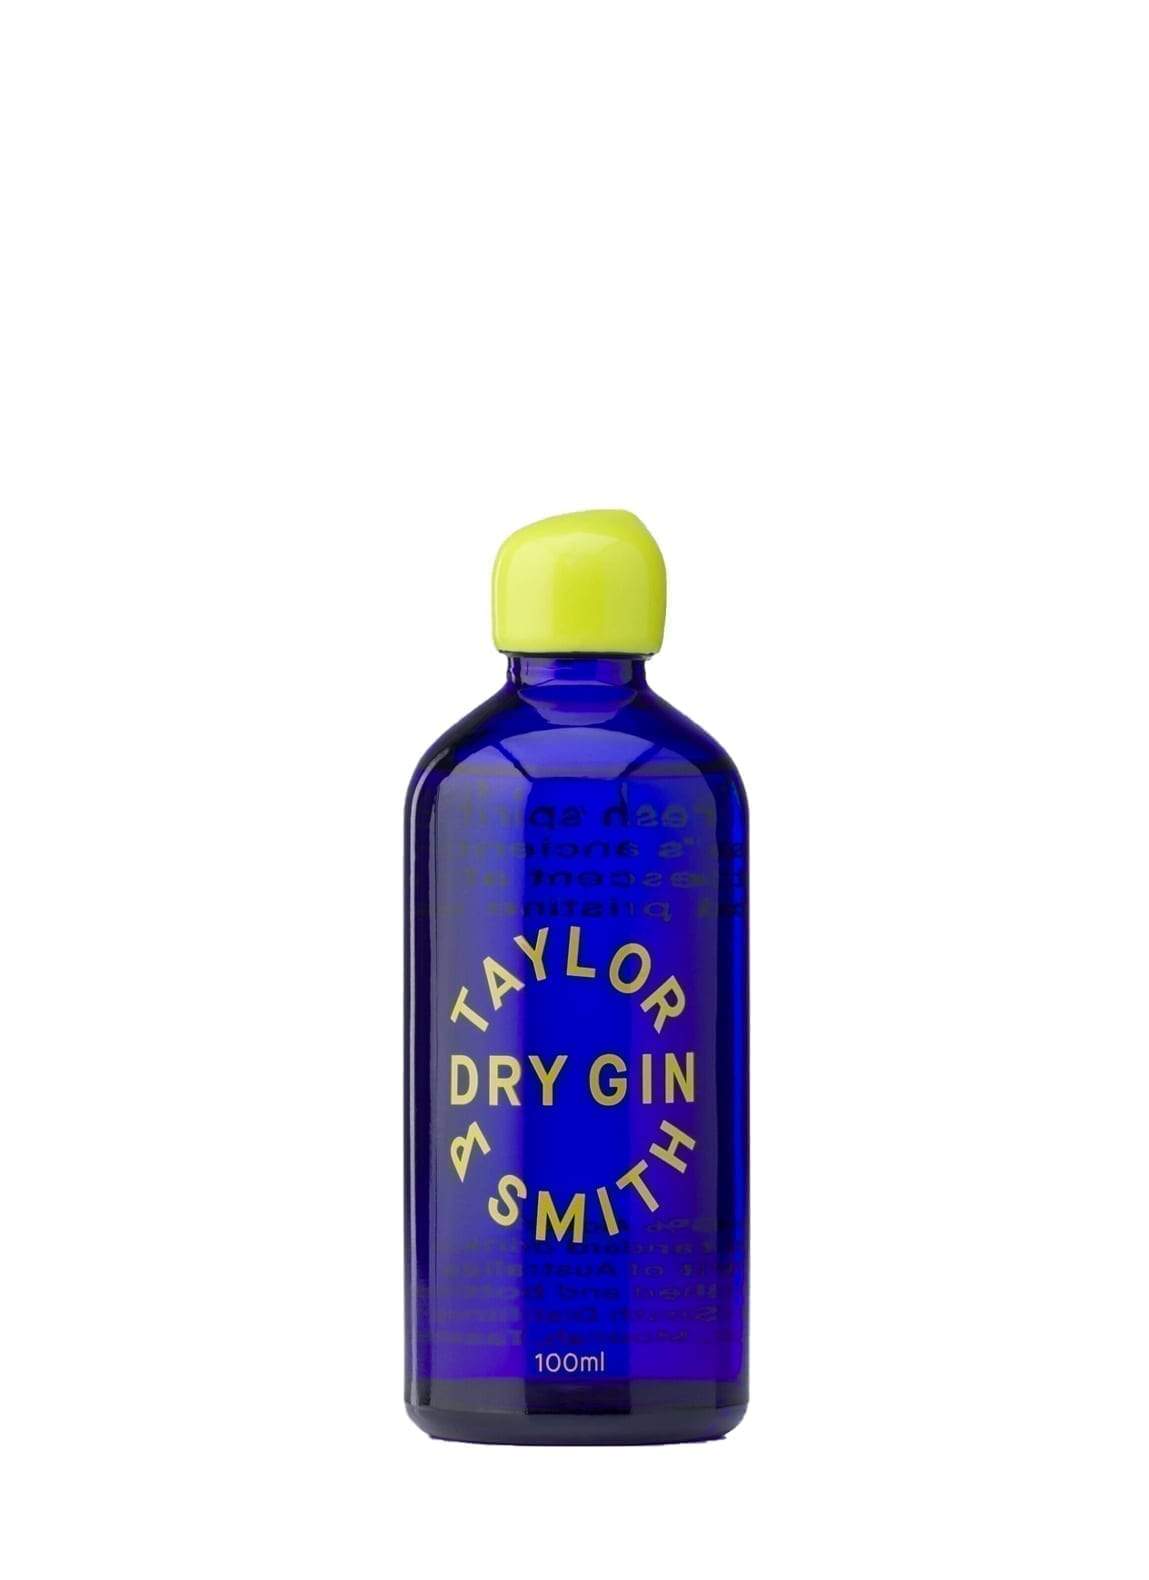 Taylor & smith Dry Gin 46% 100ml | Gin | Shop online at Spirits of France